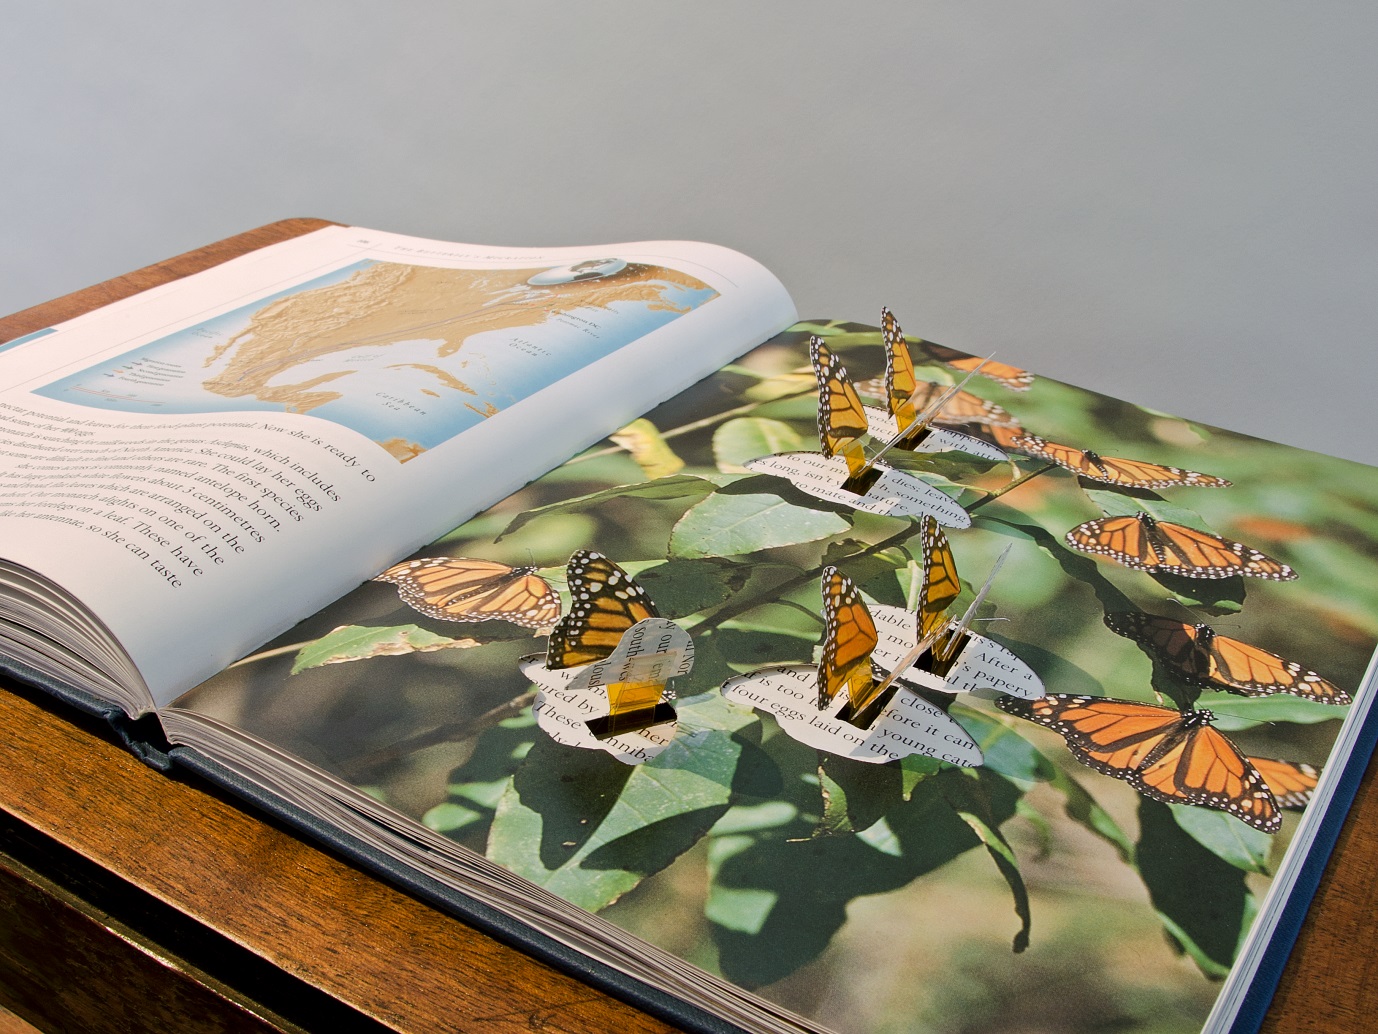 Picture Credit: Butterfly Book (2007). Andrea Roe in collaboration with Richard Brown. Photographed by Michael Wolchover.